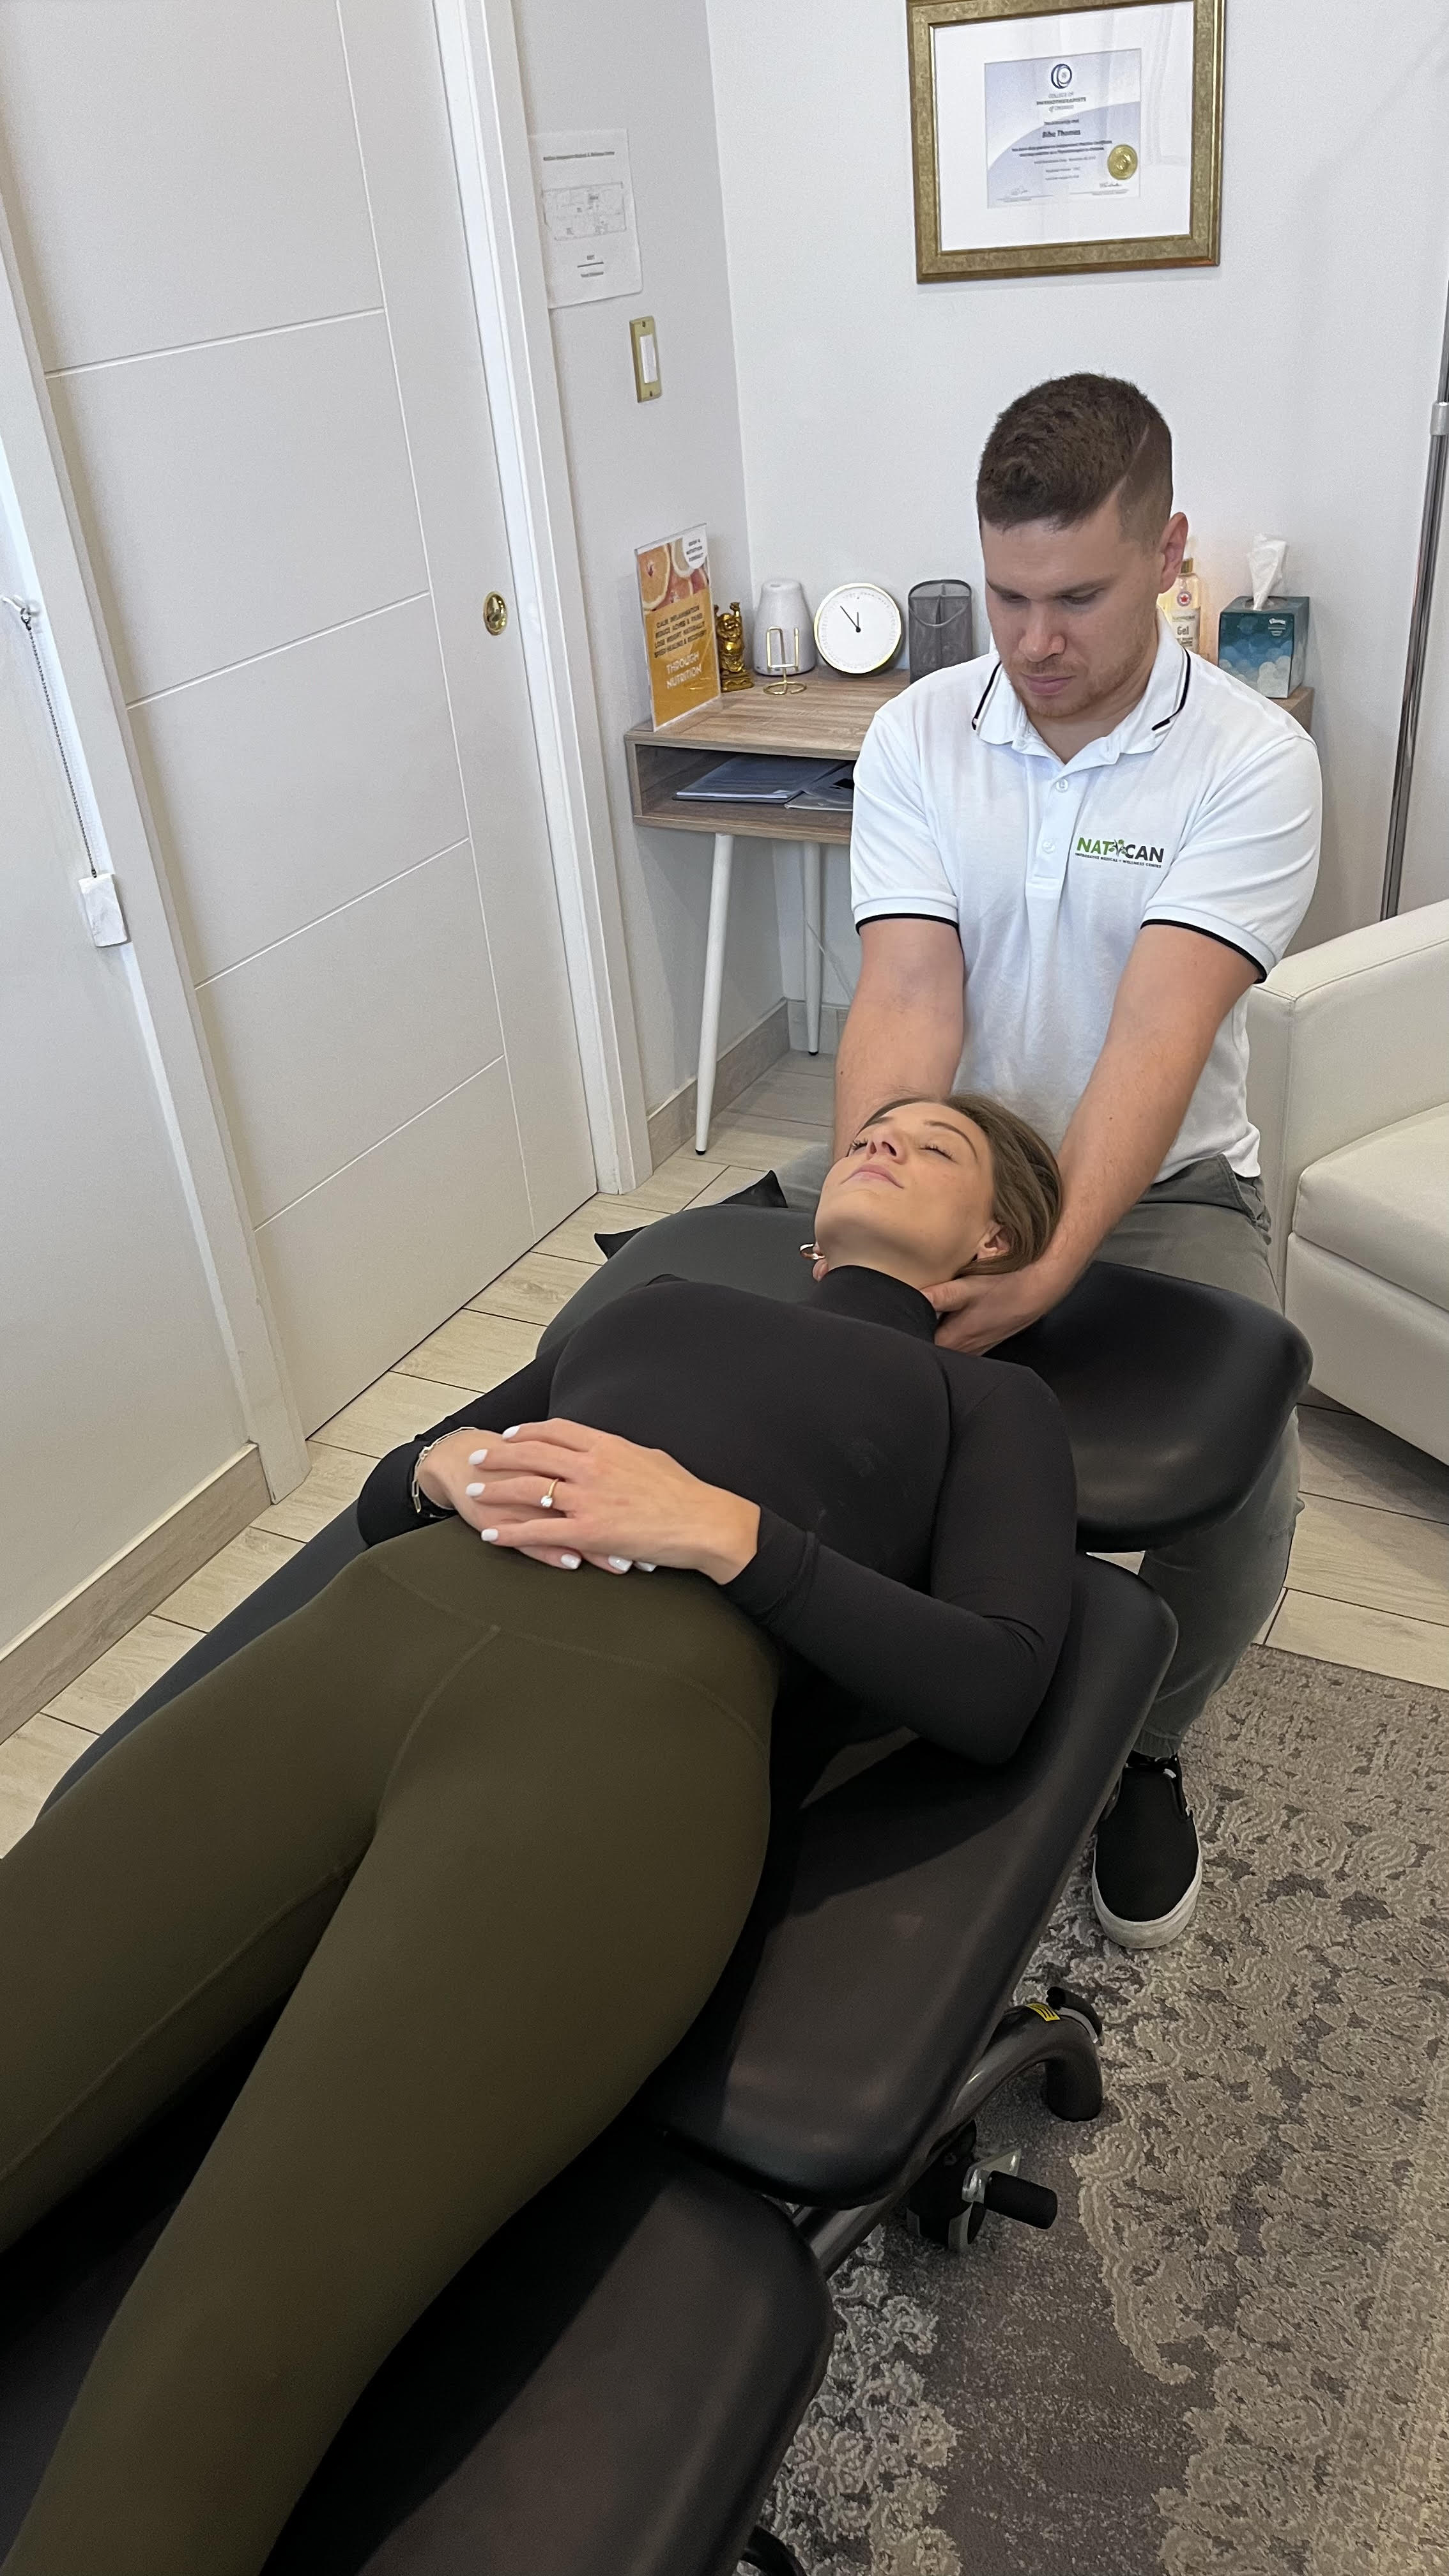 A woman in olive-coloured pants and a black shirt lays on her back on a treatment table to allow a health care professional assist her with sinus problems and headaches.